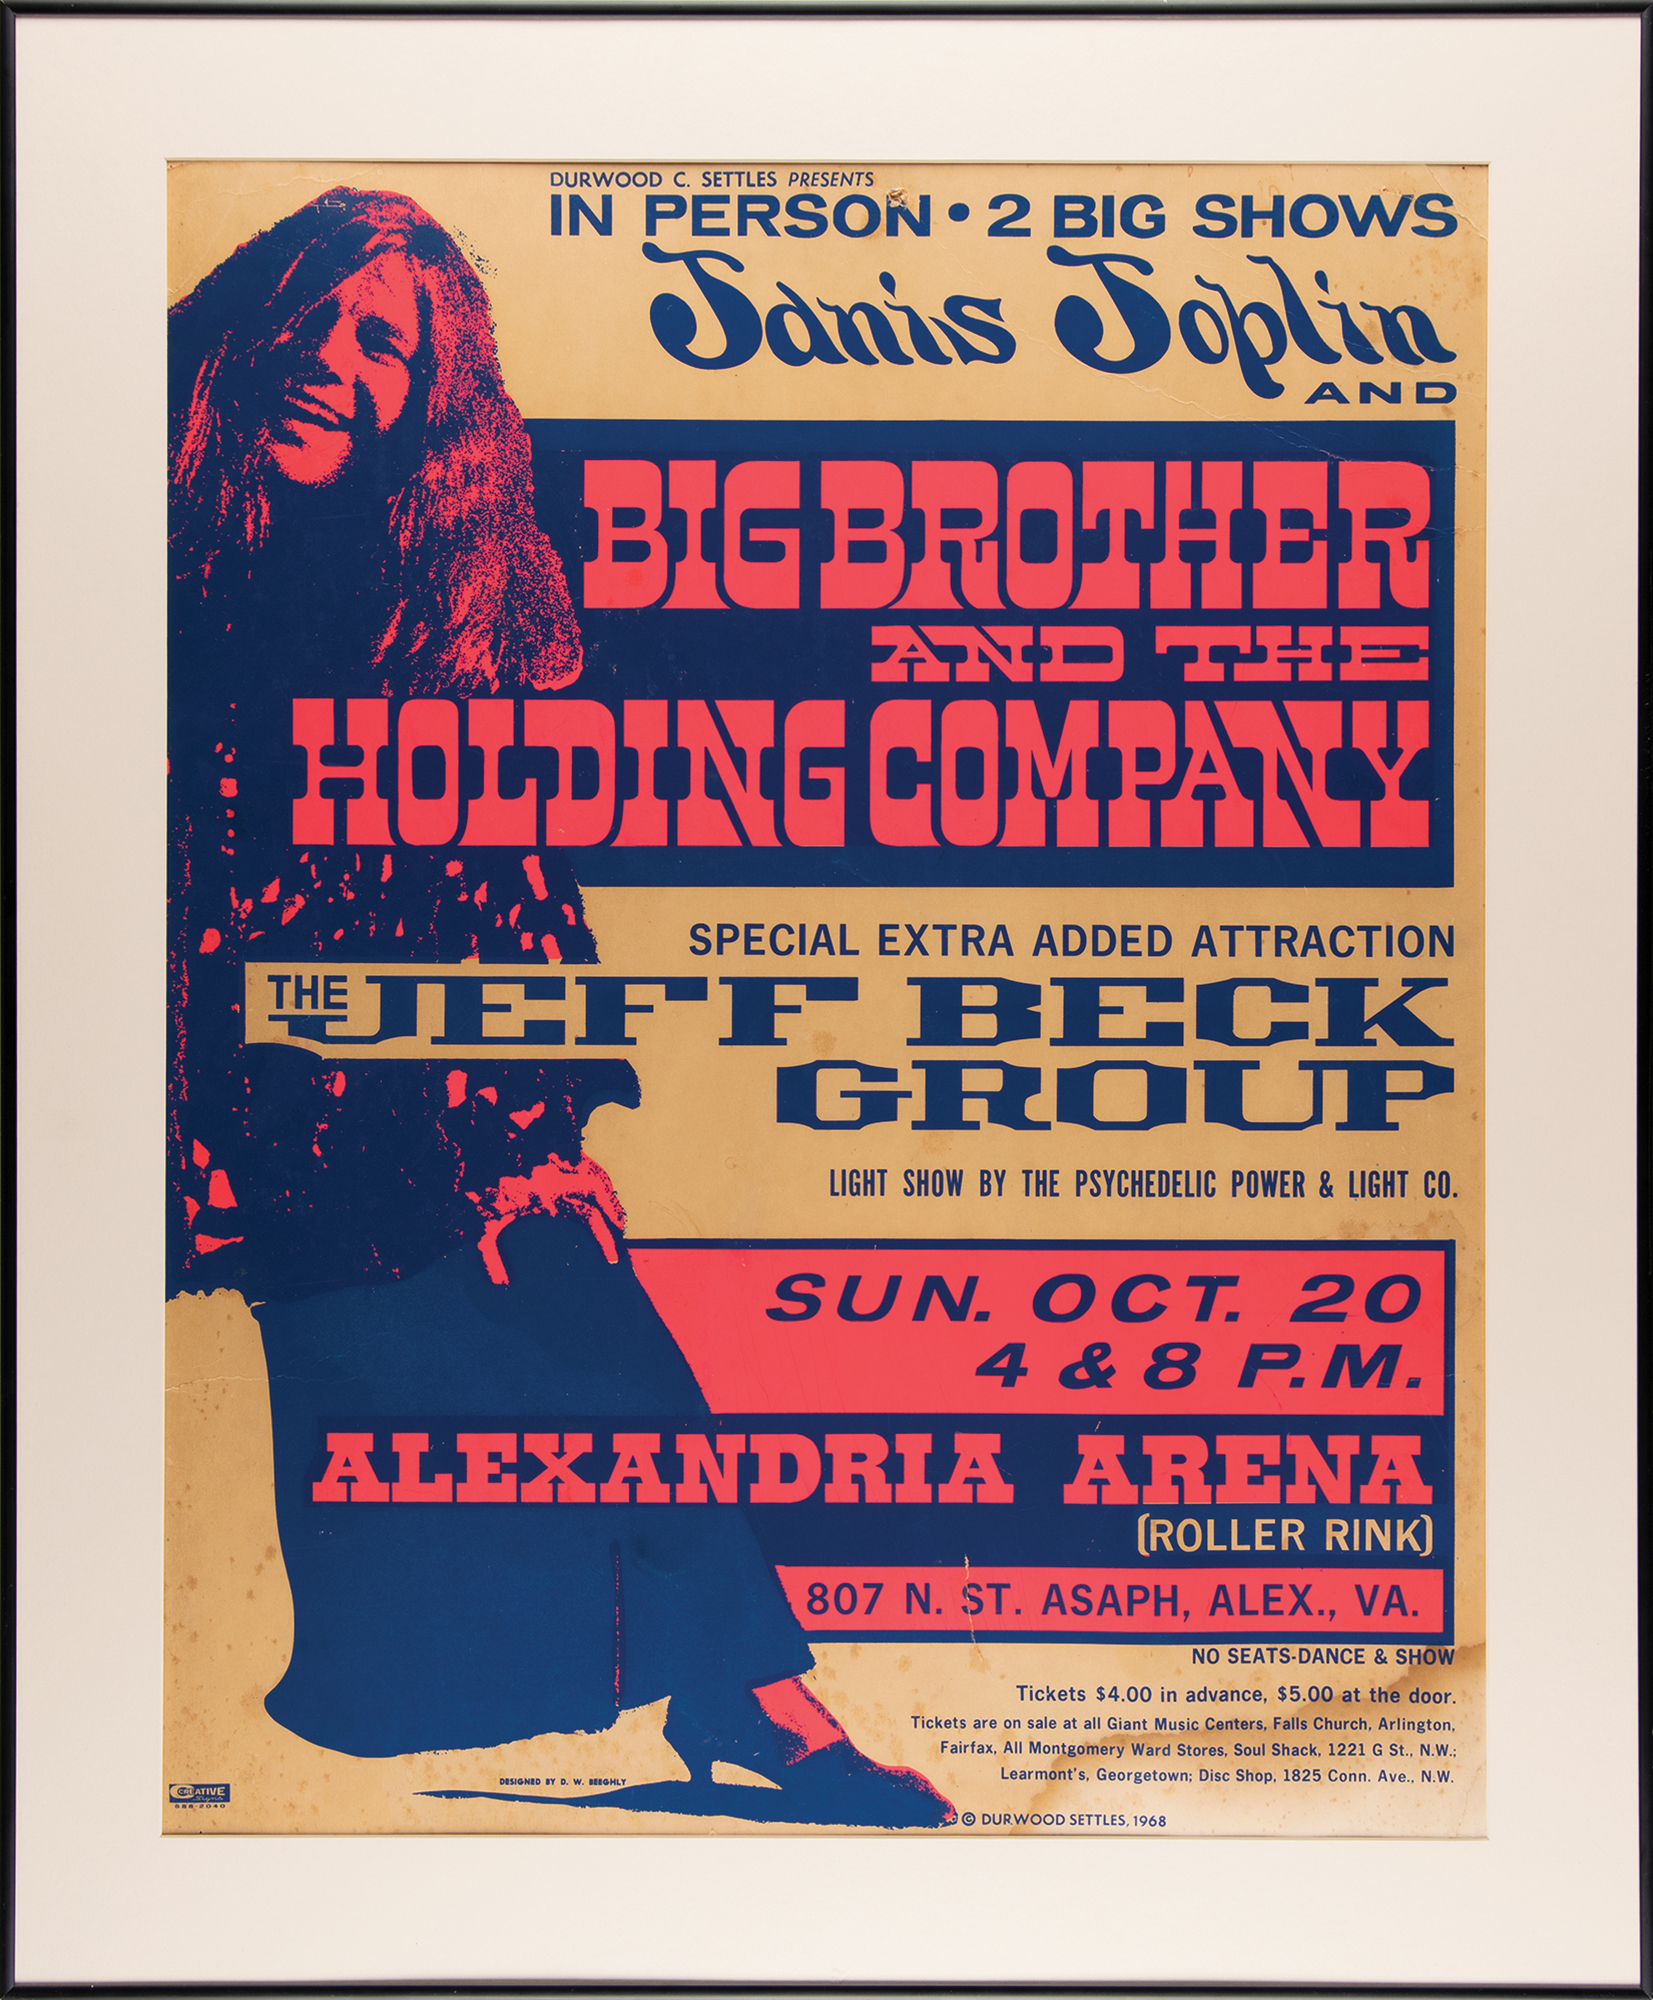 Lot #900 Janis Joplin and Big Brother and the Holding Company with Jeff Beck Group 1968 Alexandria Concert Poster (Beeghly) - Image 2